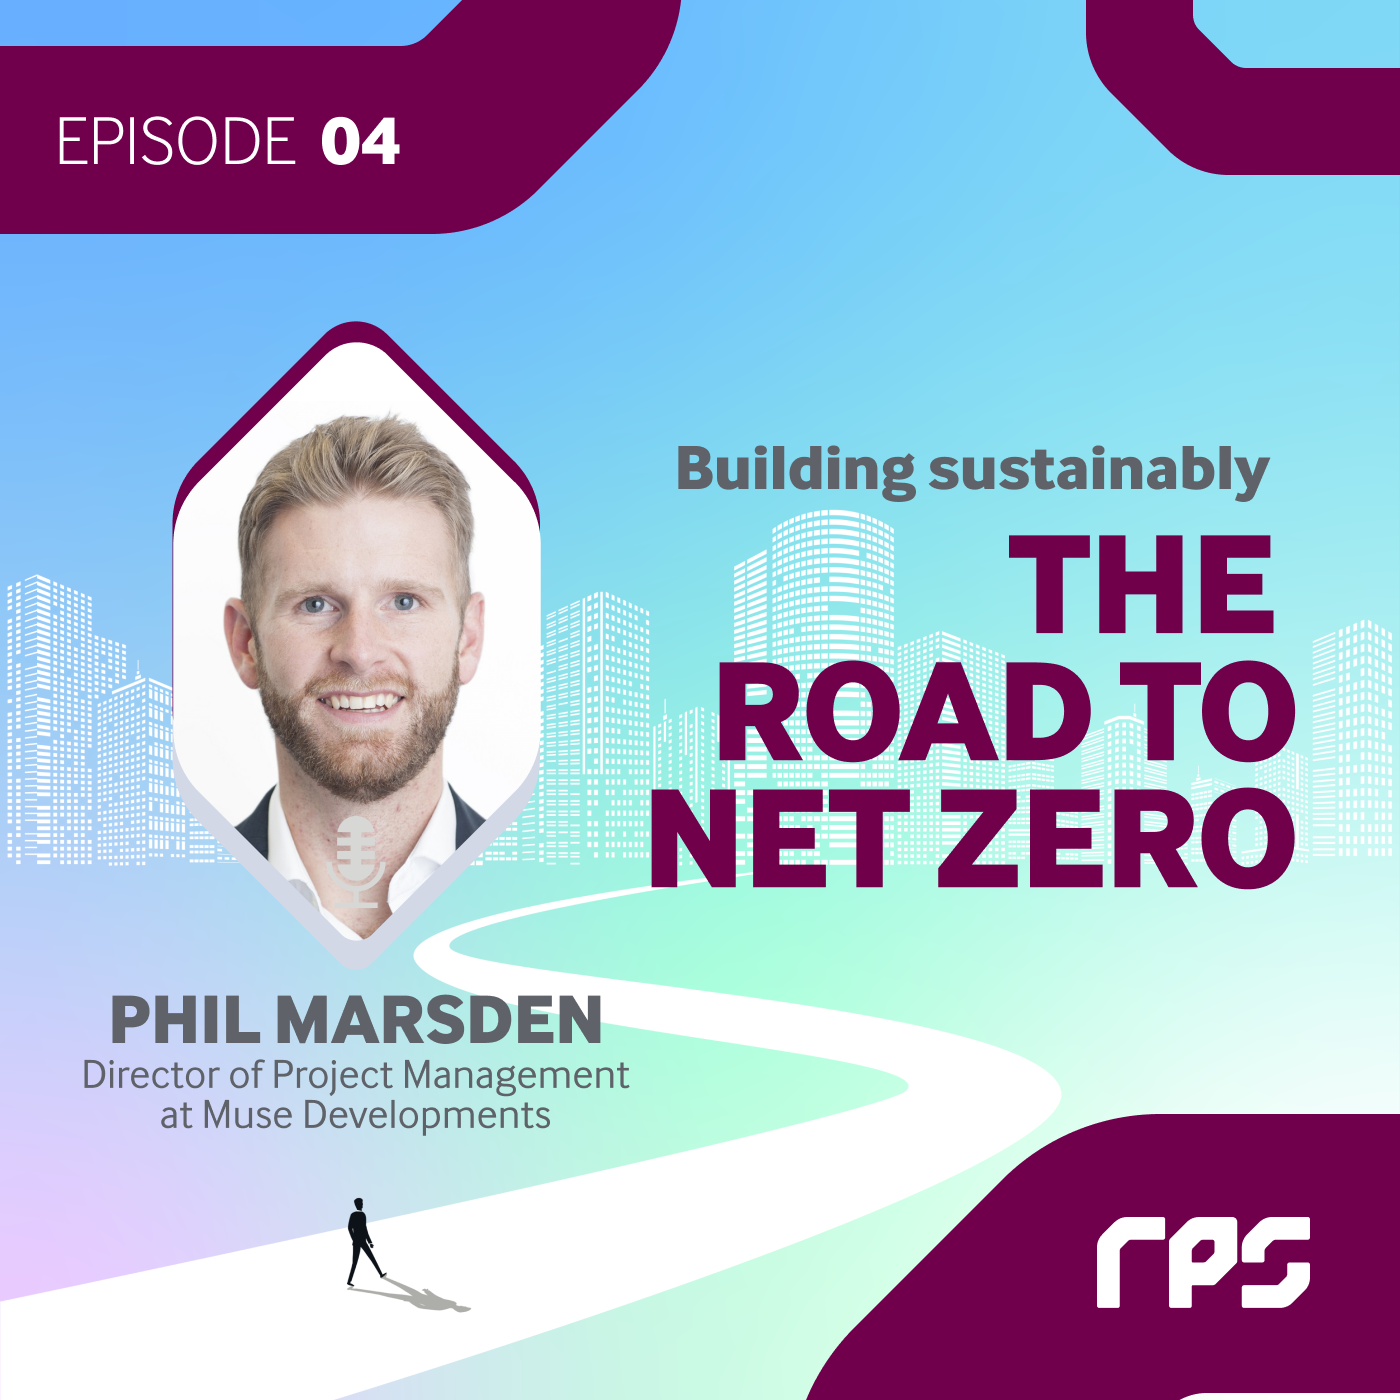 The Art and Science of Building Sustainably with Phil Marsden, Director of Project Management at Muse Developments